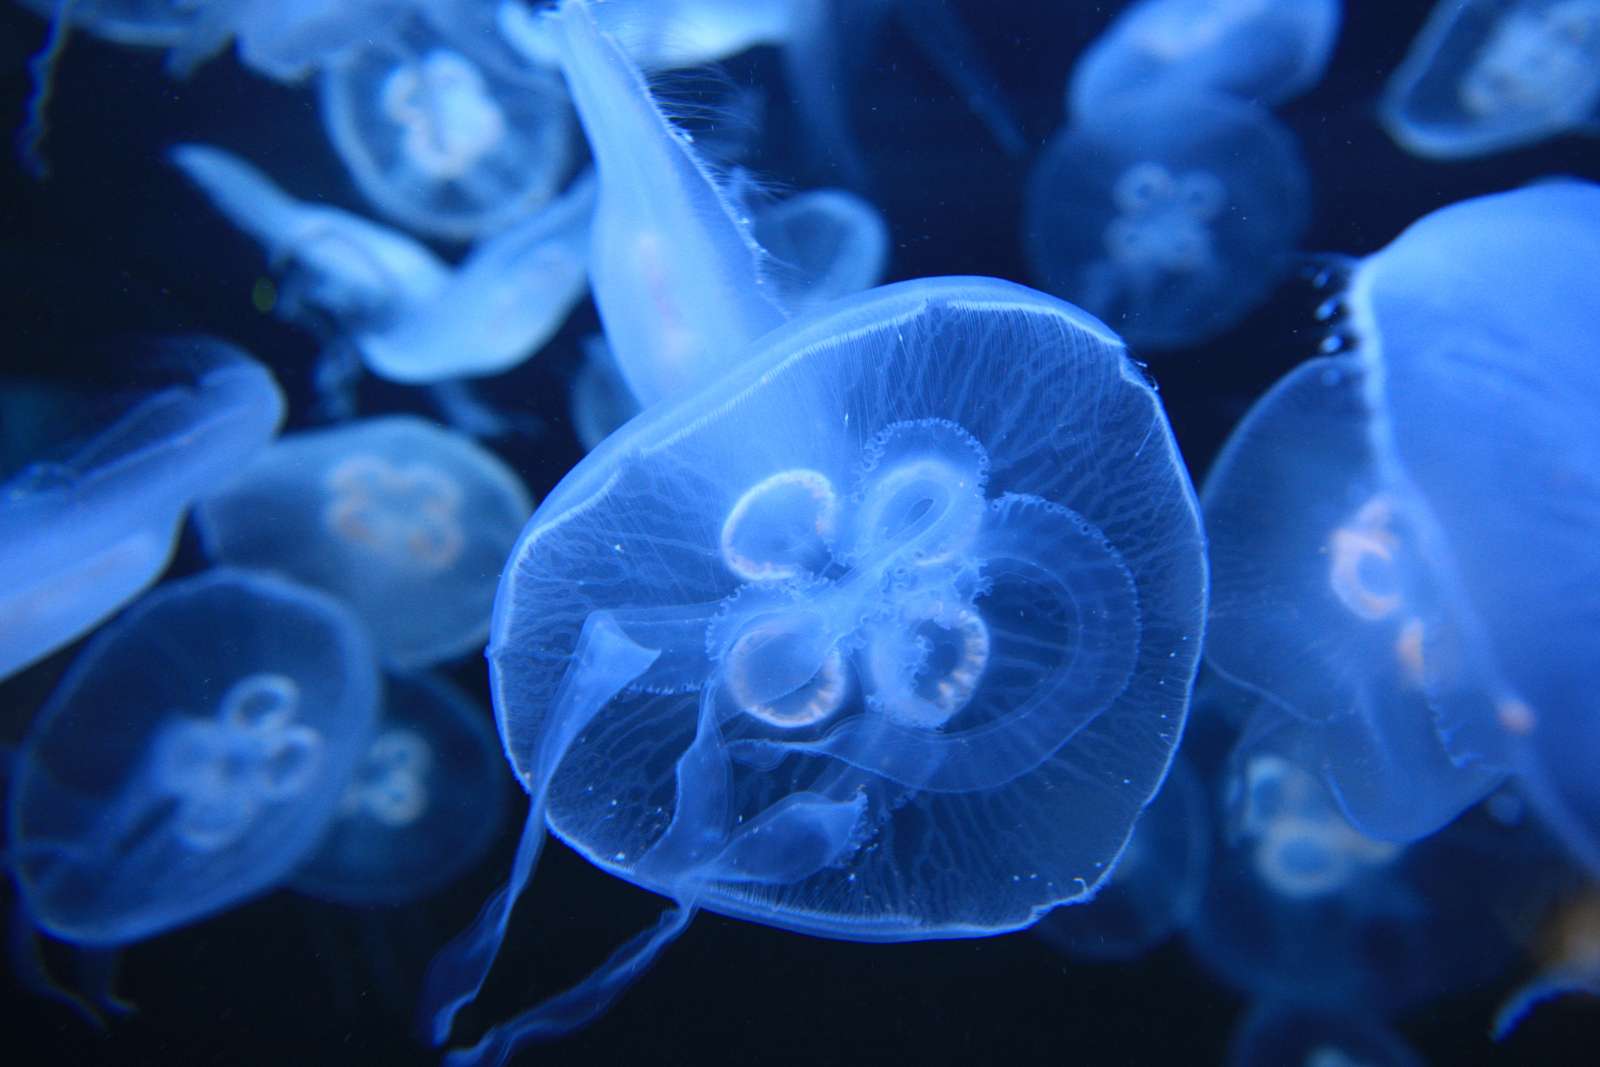 Why Did The Moon Jelly Population Increase